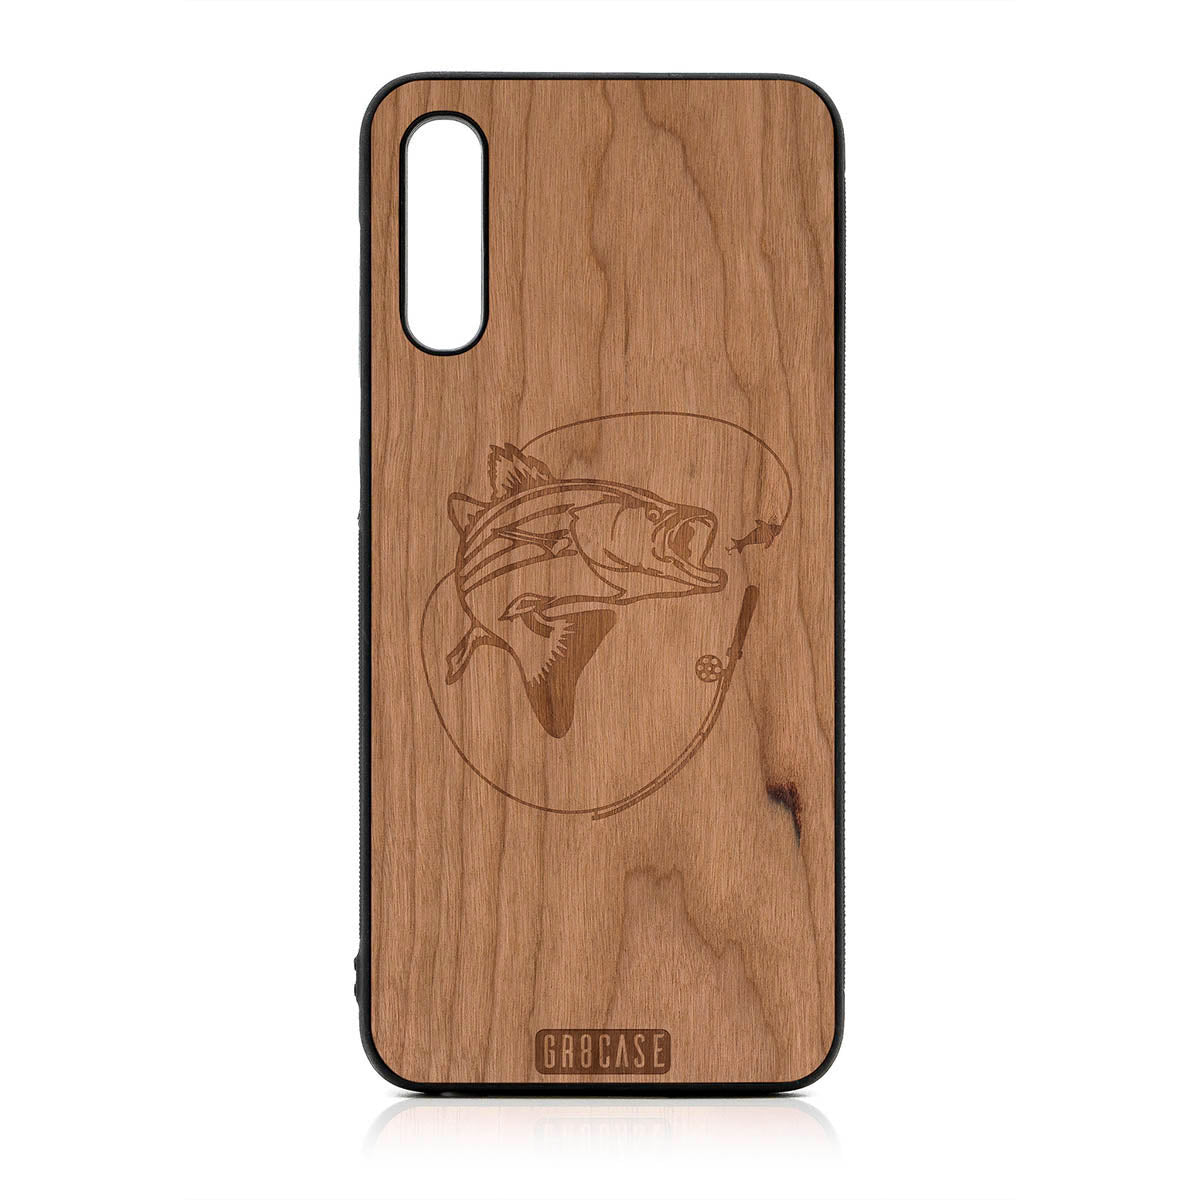 Fish and Reel Design Wood Case For Samsung Galaxy A50 by GR8CASE